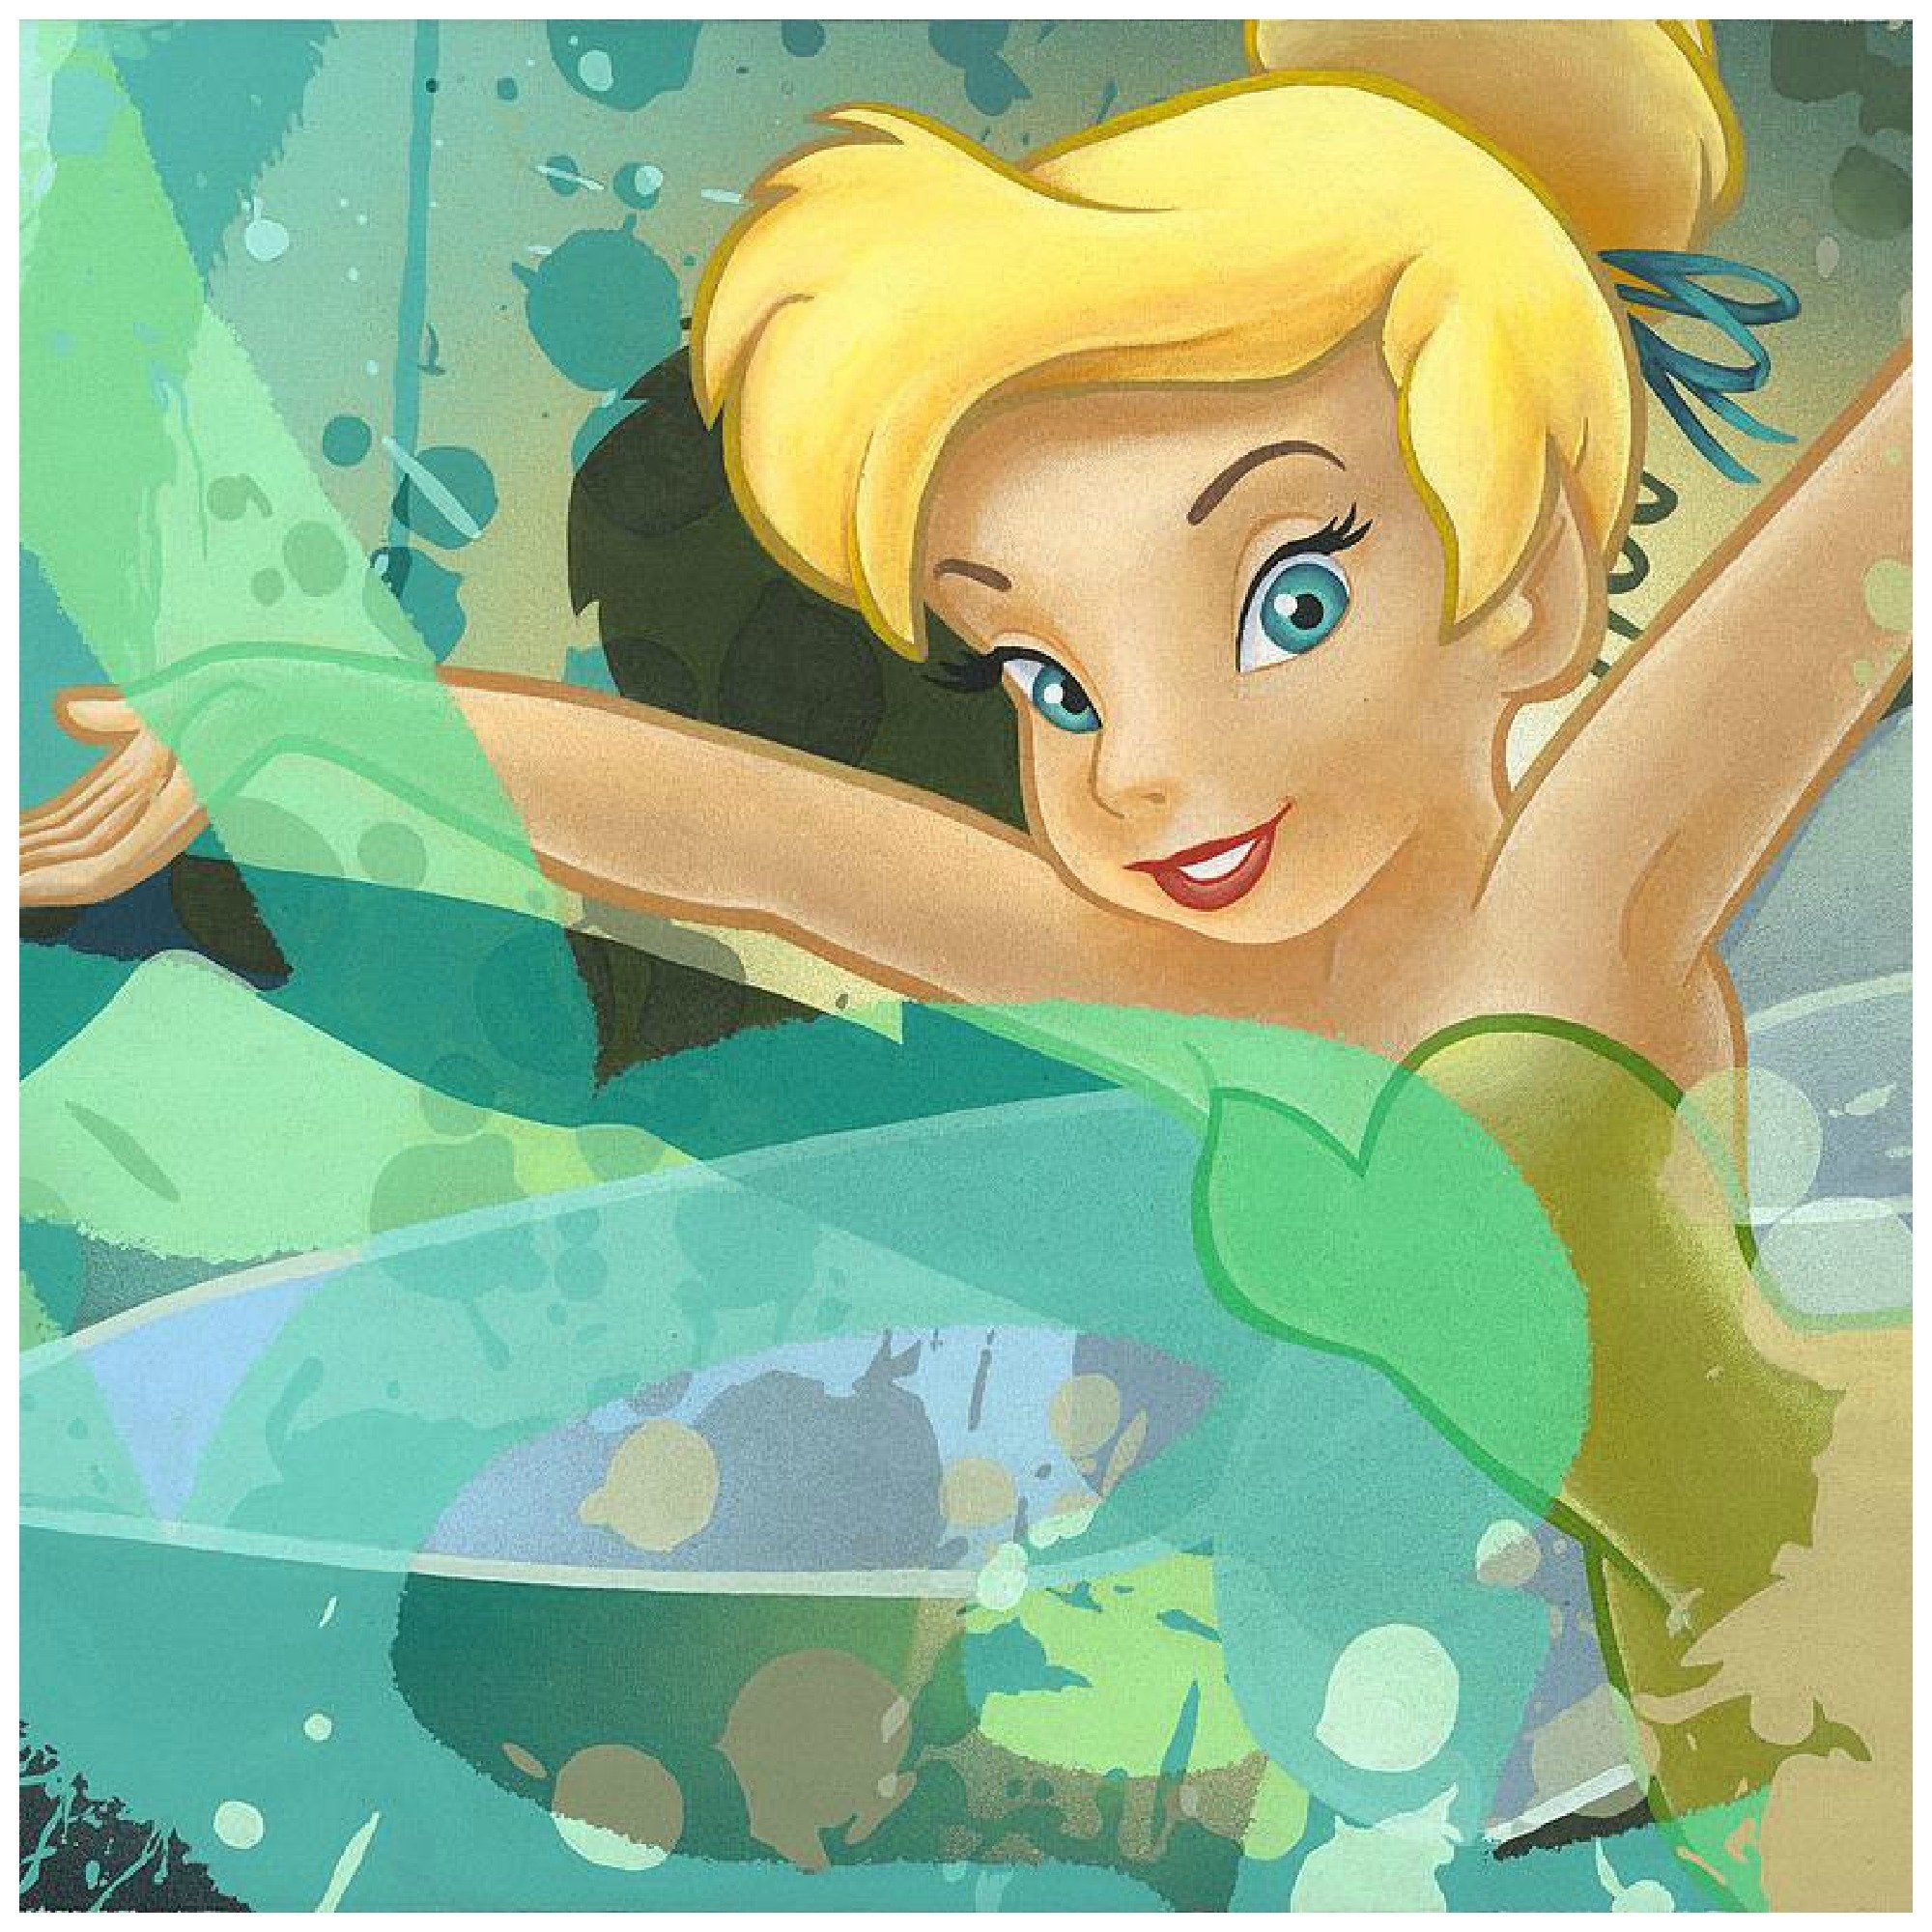 Tinker Bell  by Ryan “ARCY” Christenson  Tinker Bell spreads her arms and wings...closeup